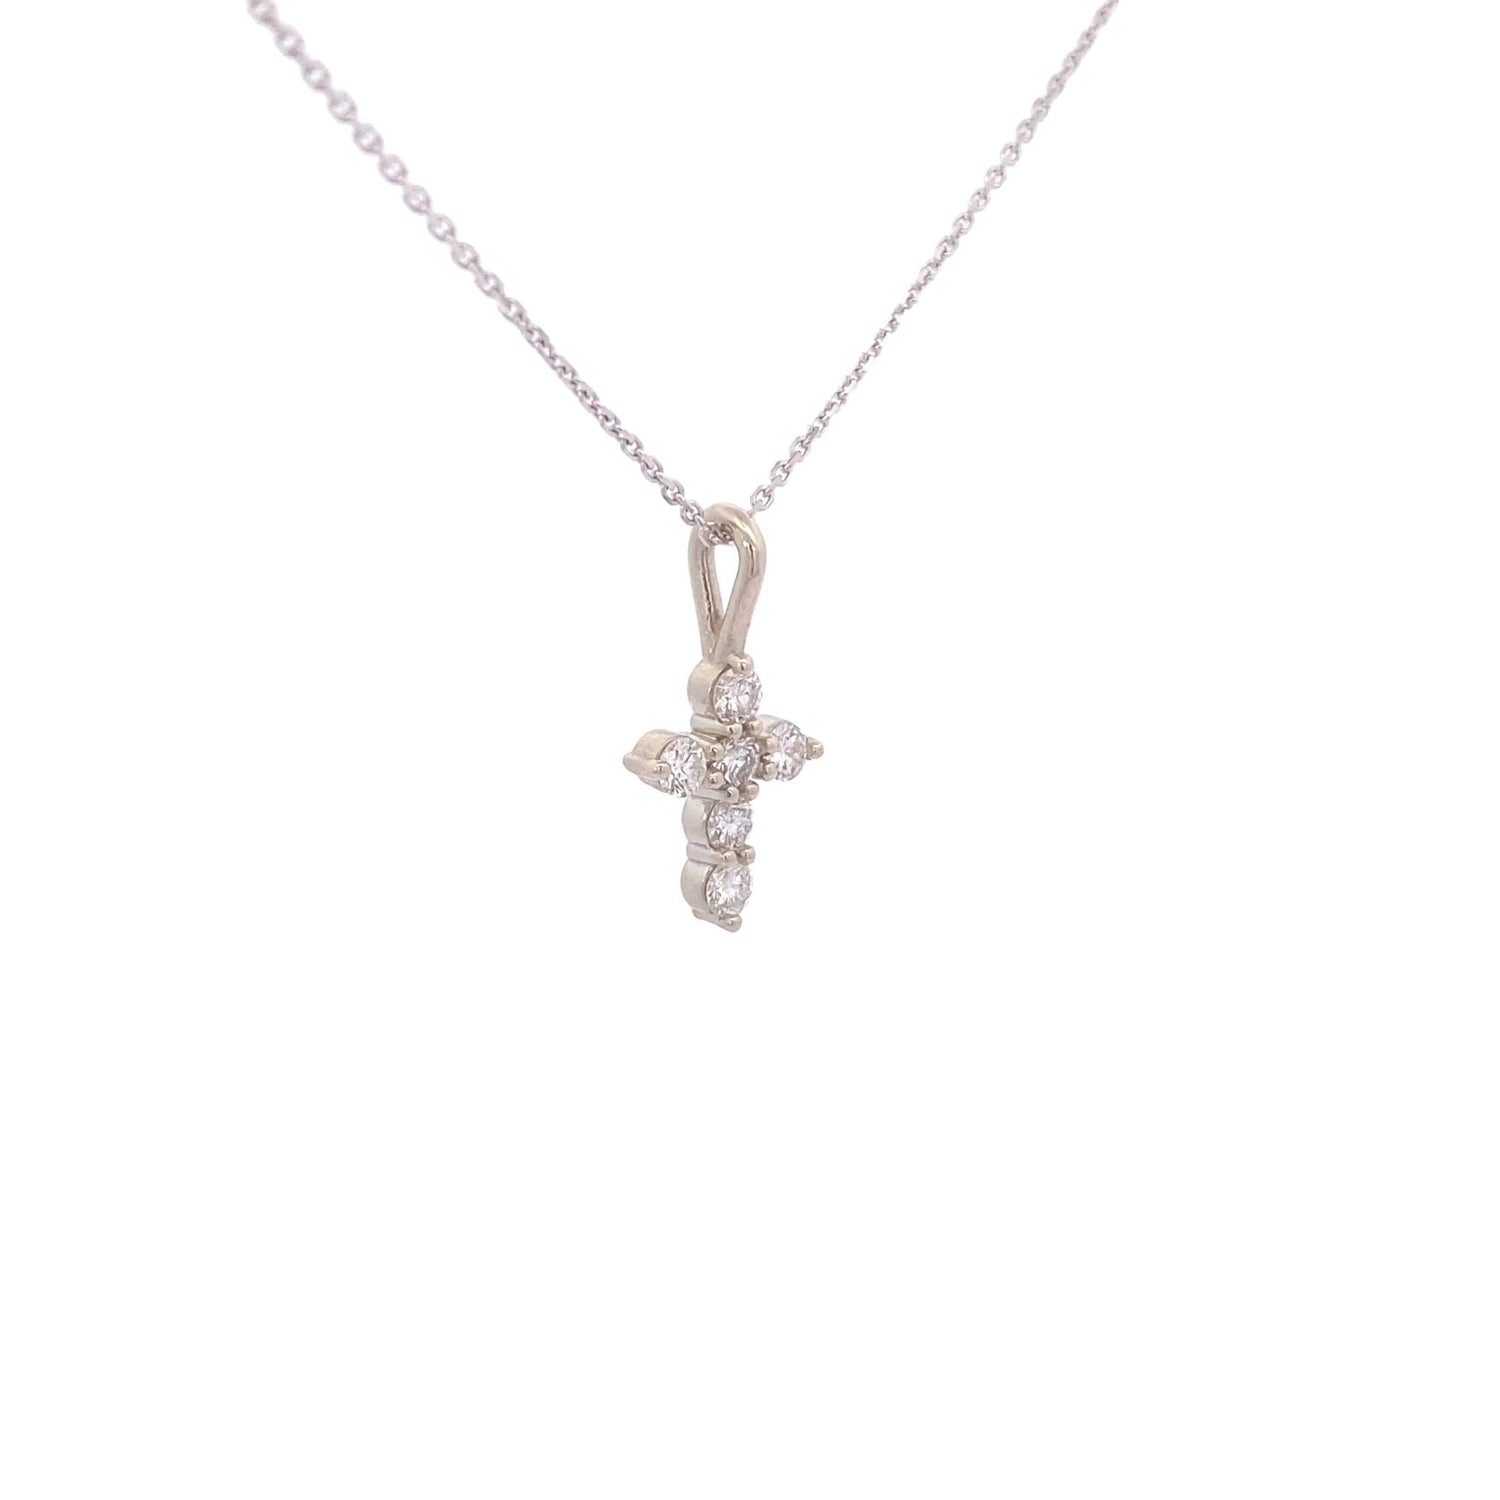 Necklace - Diamond Cross 0.30ctw in 14kt white gold - Gaines Jewelers